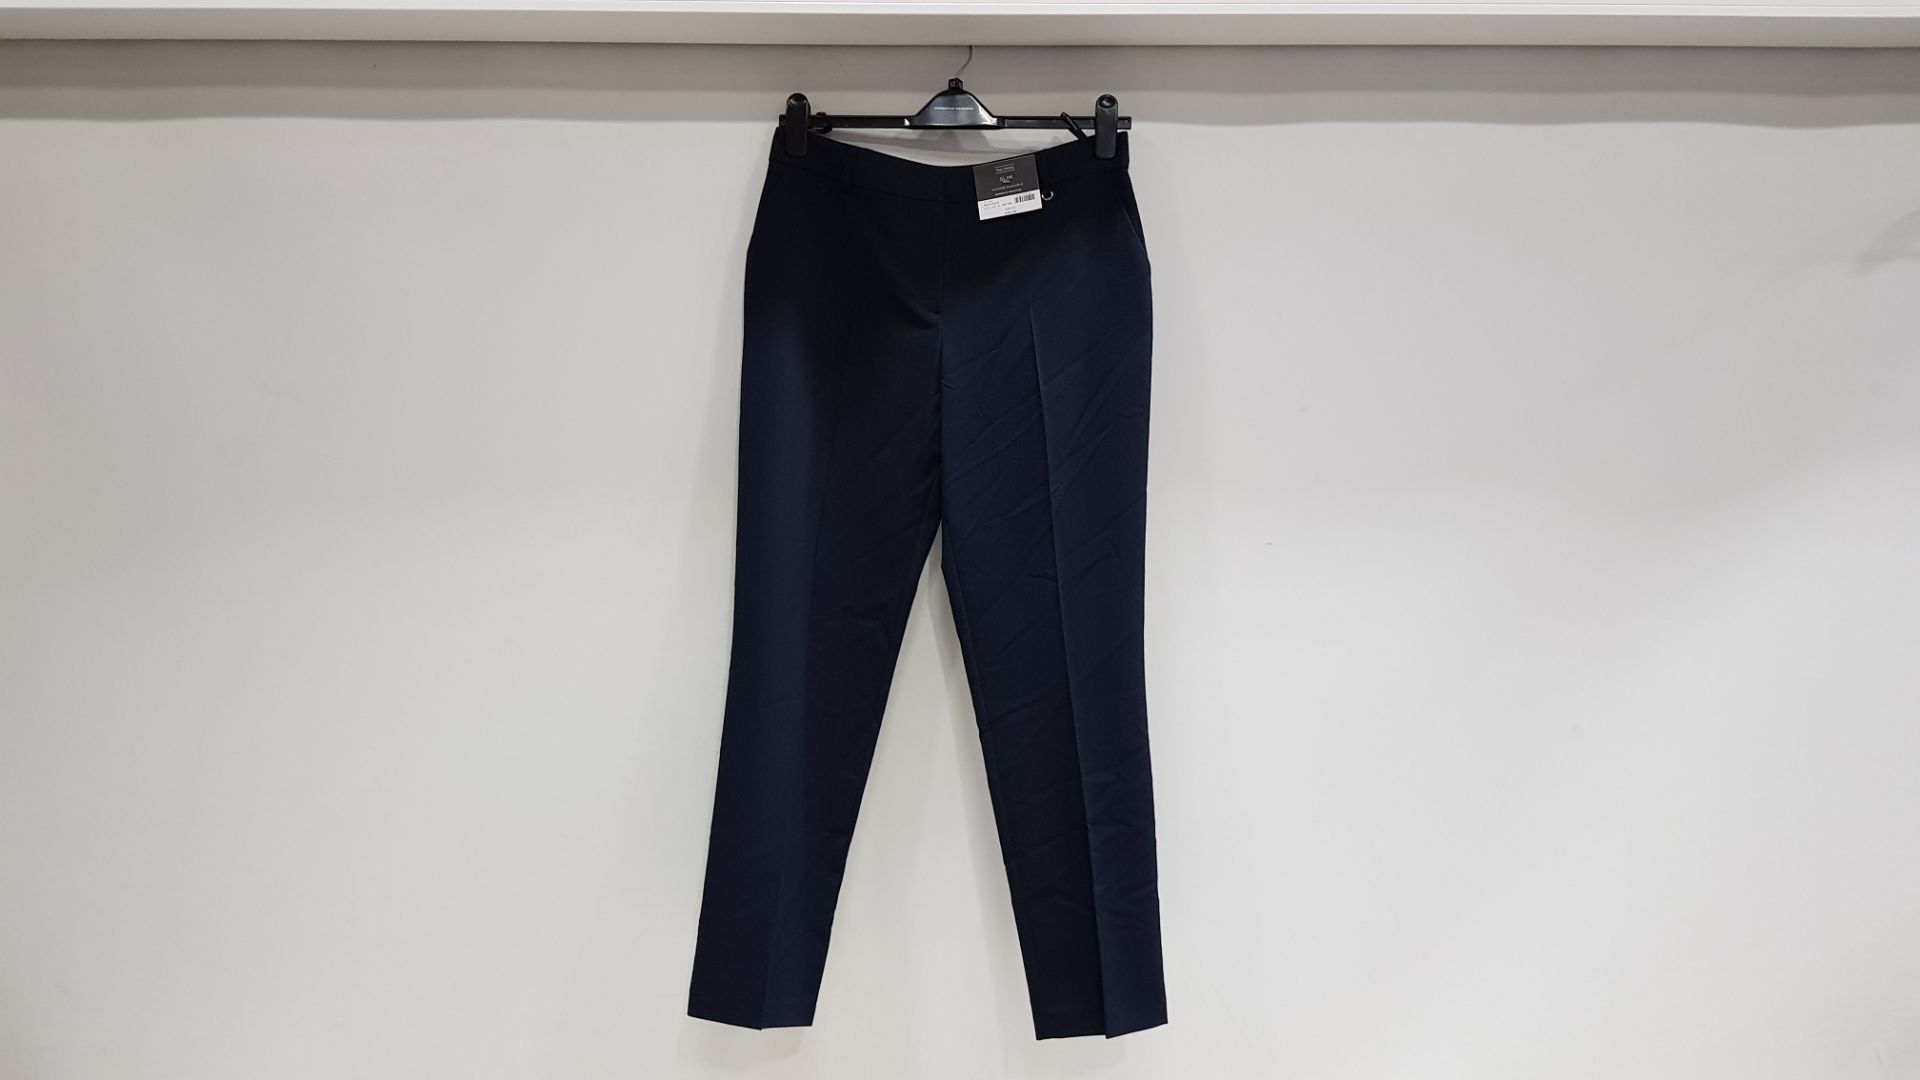 20 X BRAND NEW DOROTHY PERKINS NAVY SLIM TROUSERS IN SIZE 10, 12 AND 14 RRP £20.00 (TOTAL RRP £400.